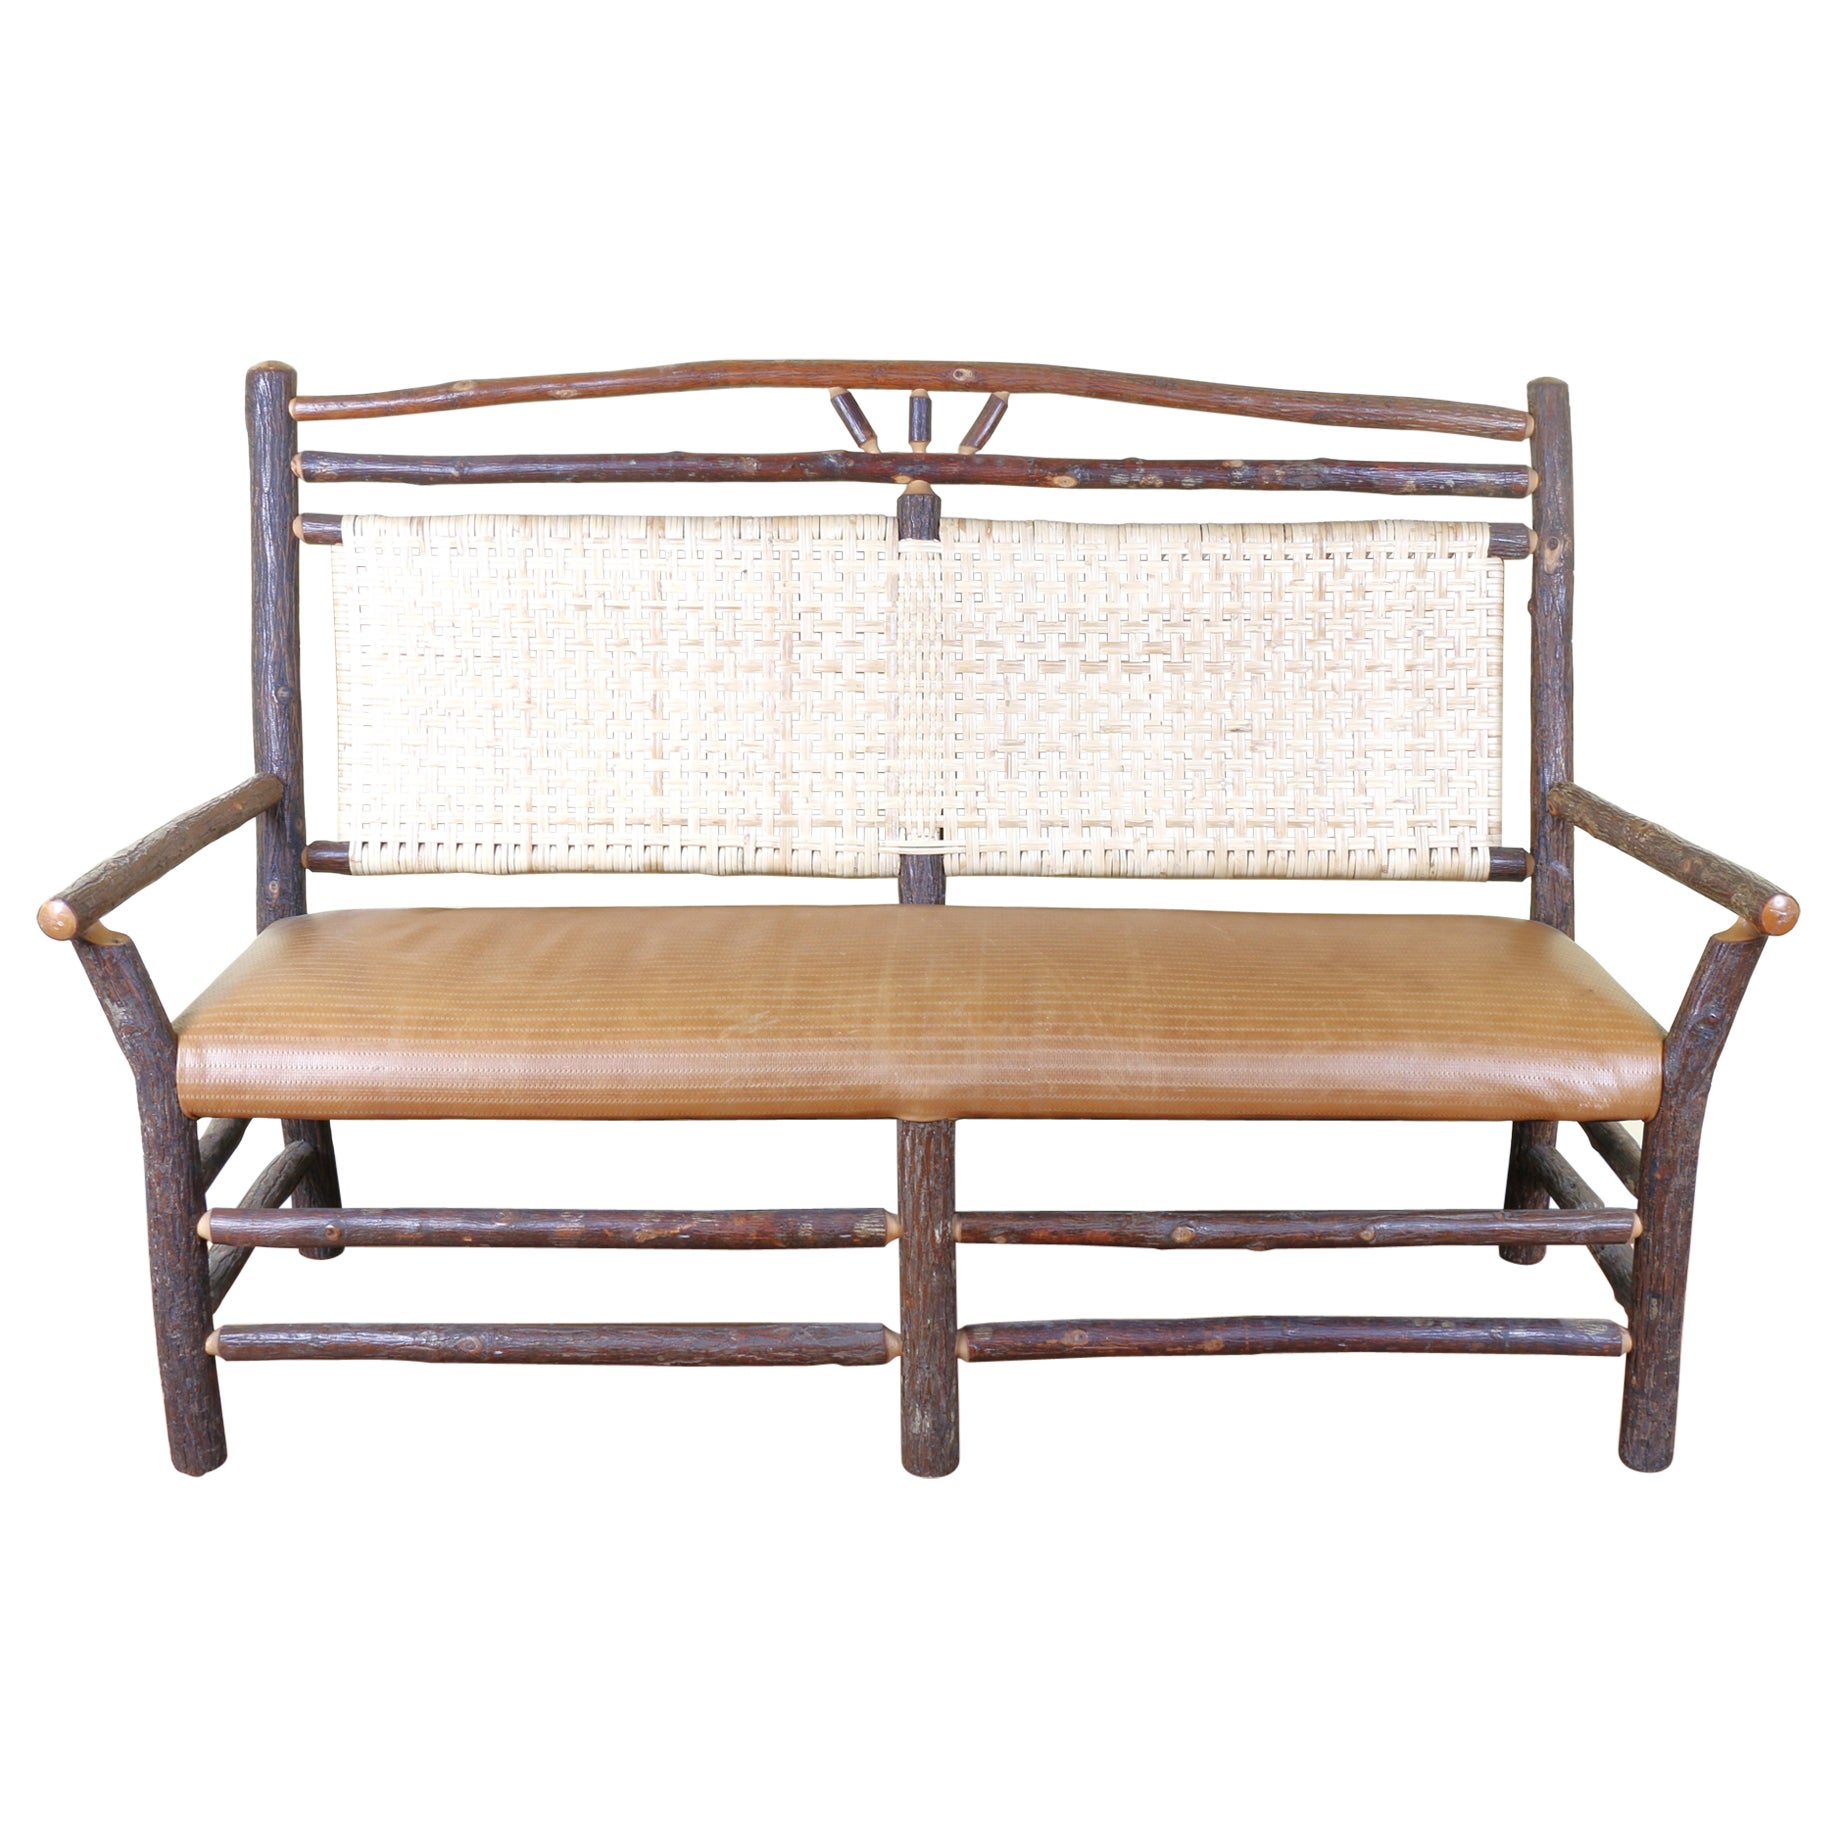 Hickory Cabin Style Bench